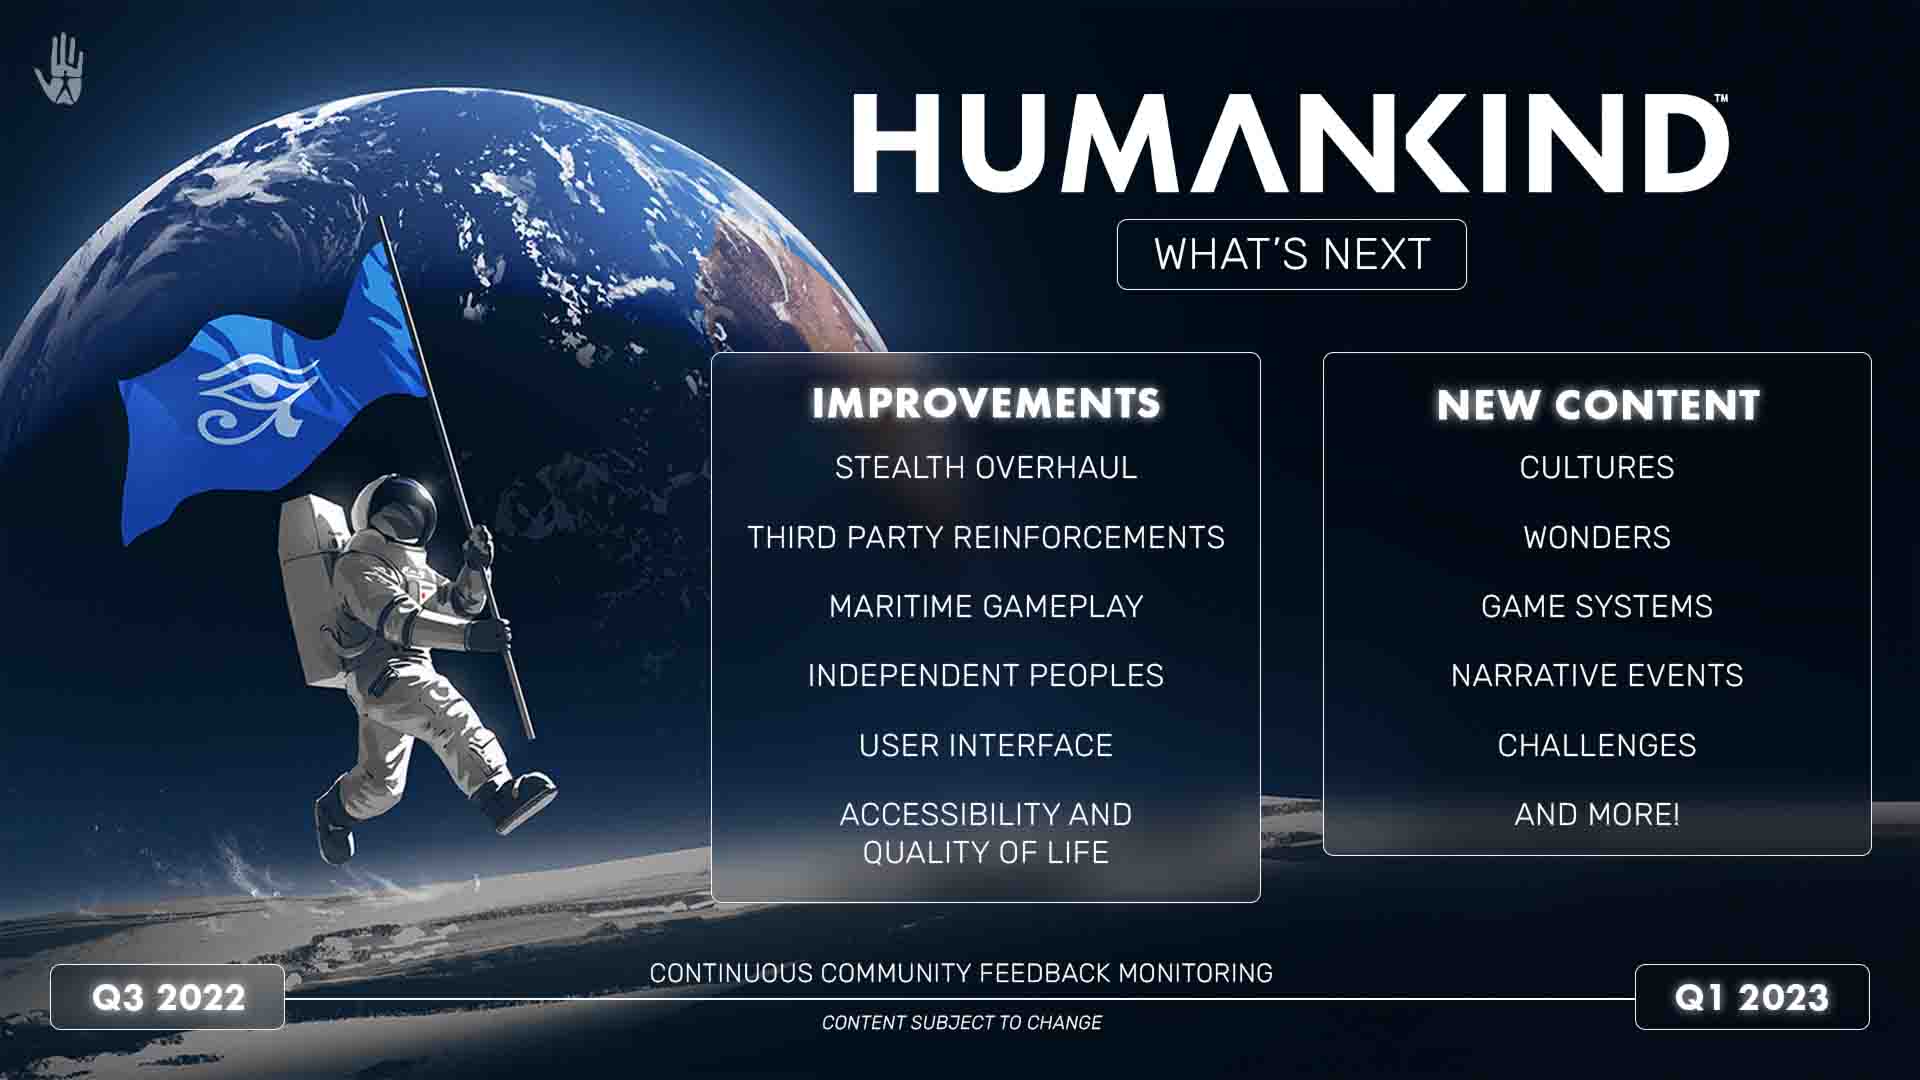 Humankind expansion "Together We Rule" announced